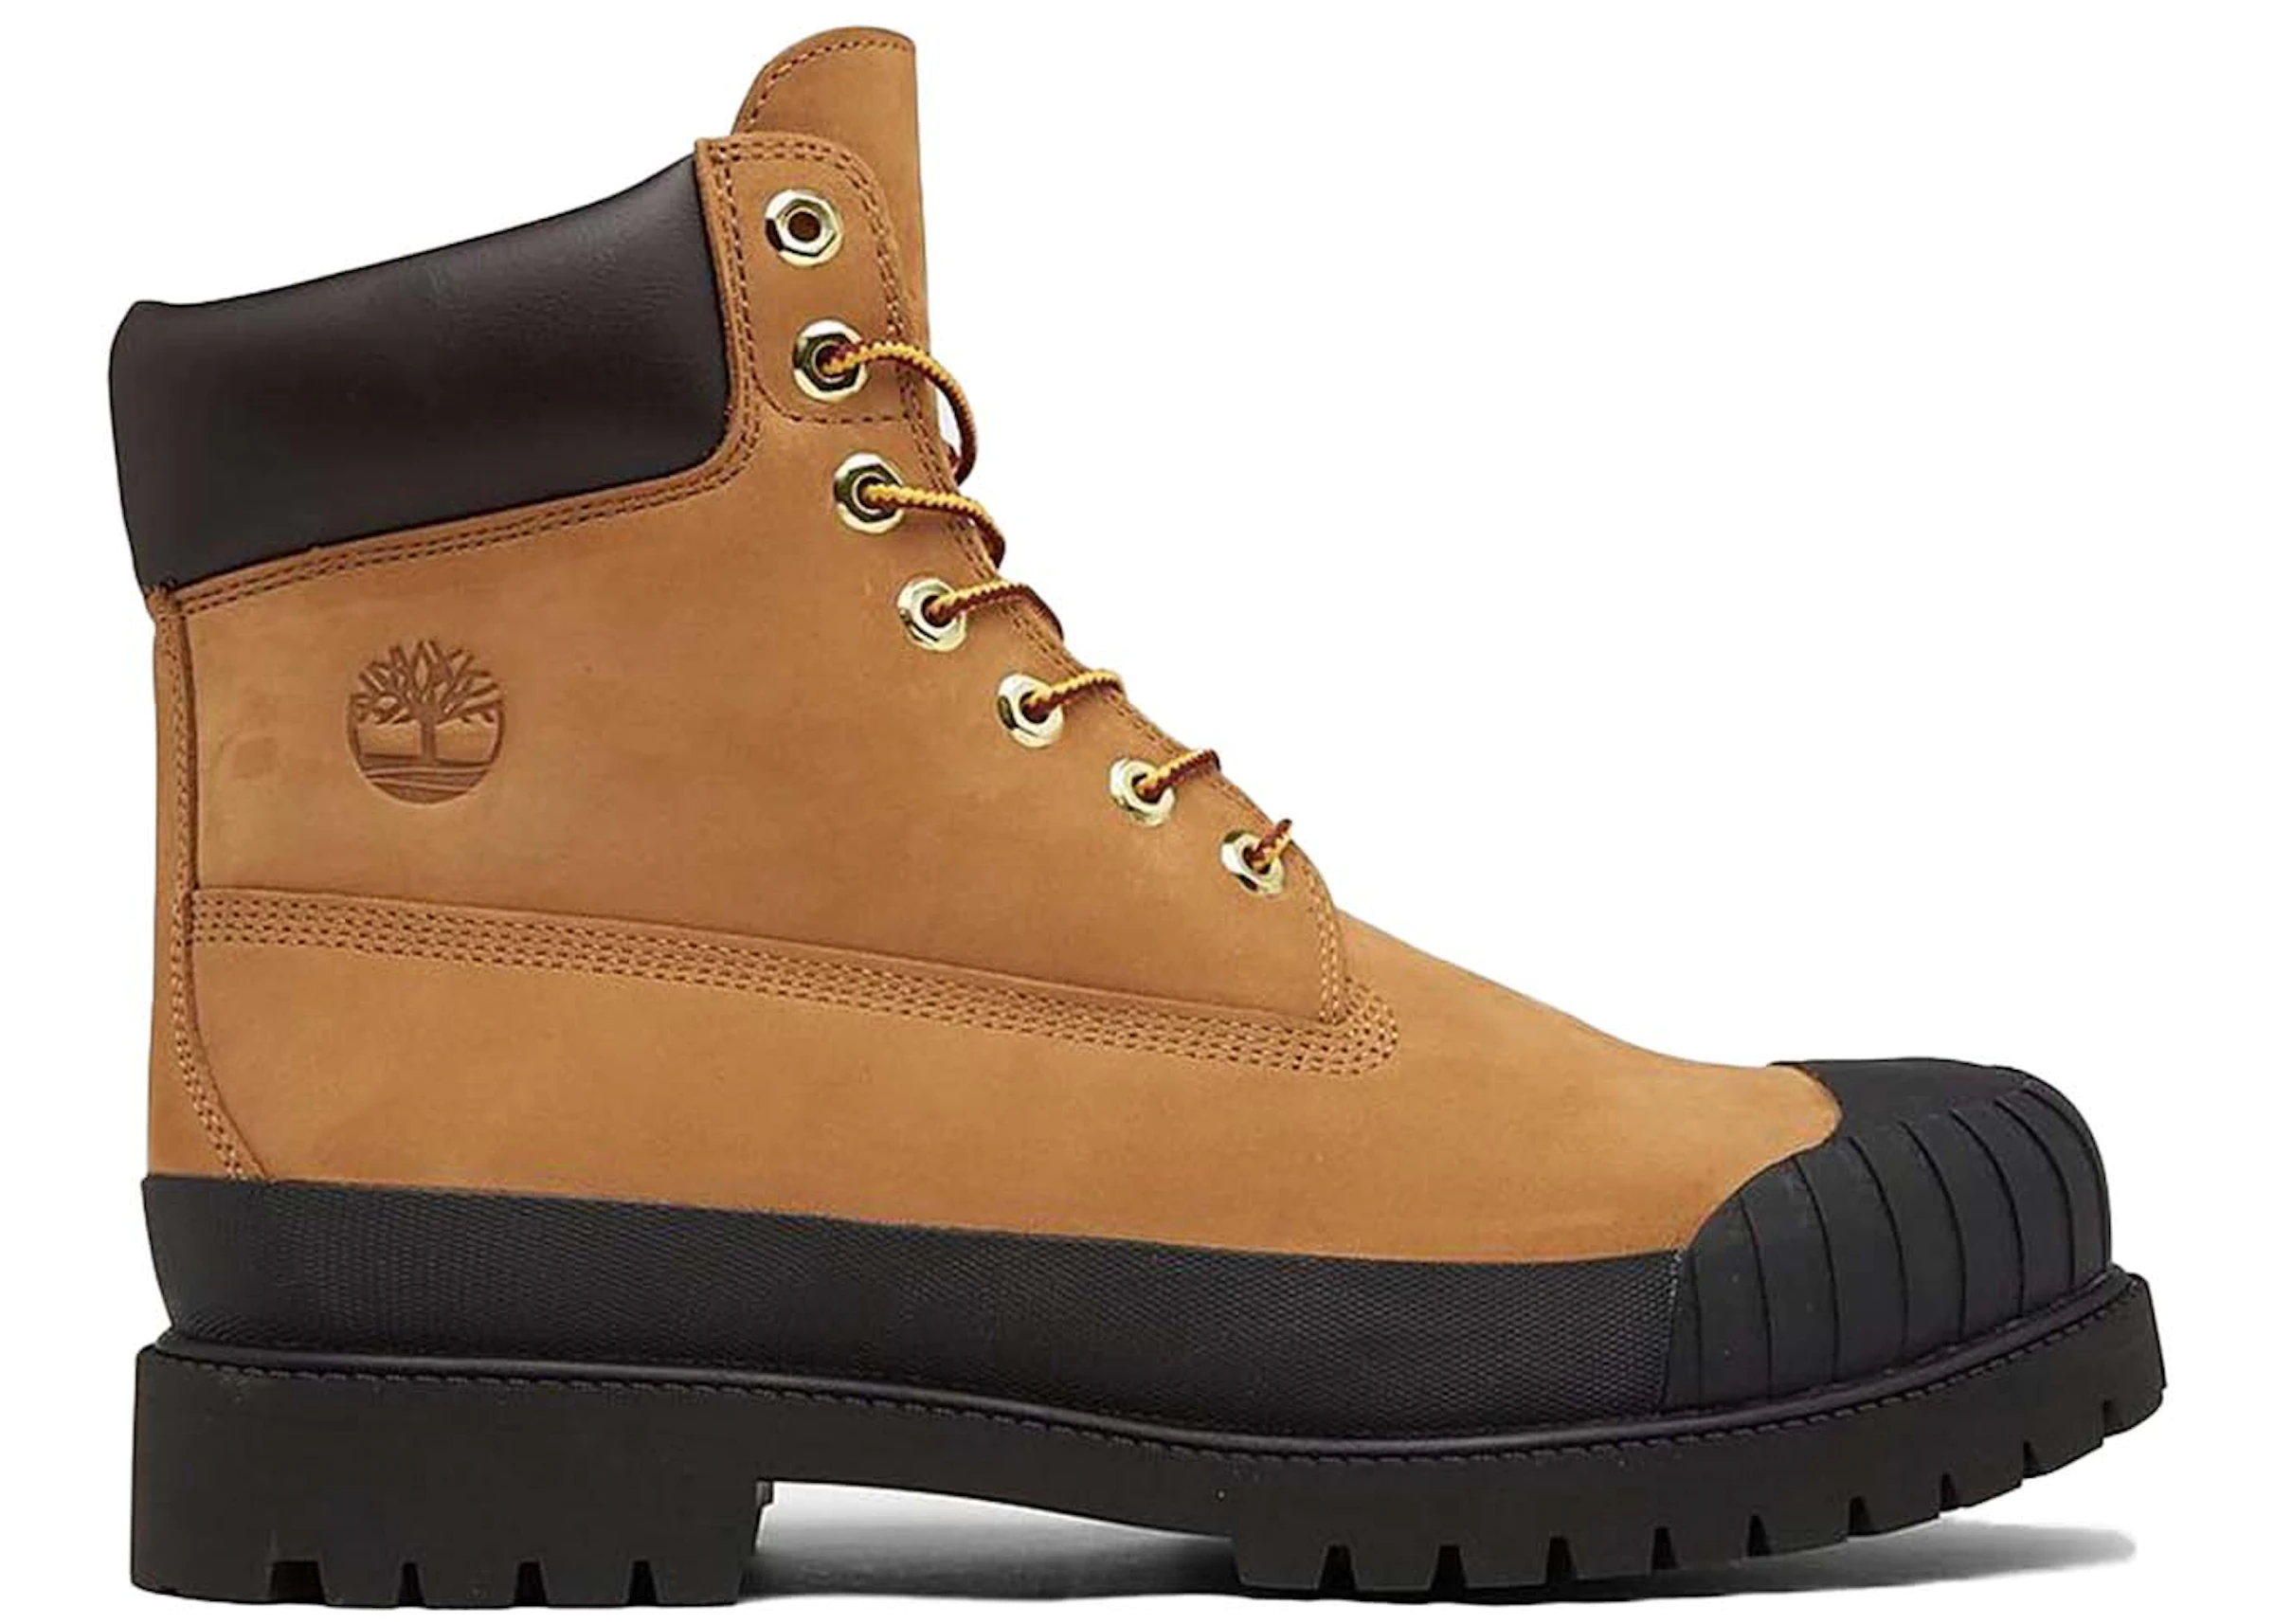 pianista Nublado incondicional Buy Timberland Boots Shoes & New Sneakers - StockX